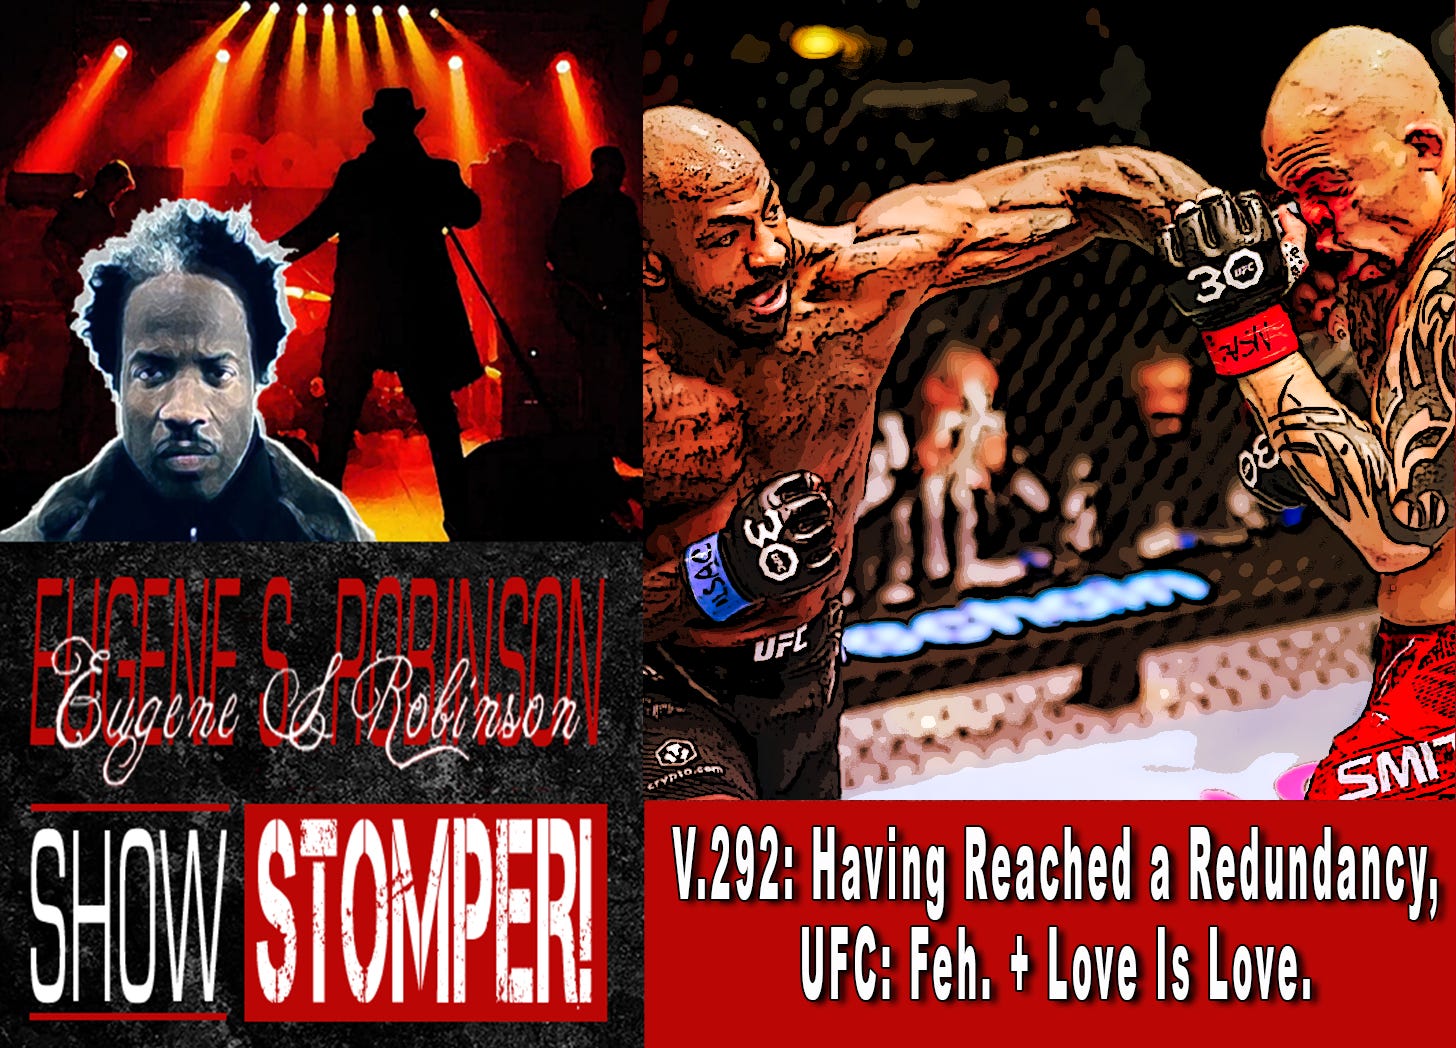 V.292: Having Reached a Redundancy, UFC: Feh. + Love Is Love on The Eugene S. Robinson Show Stomper!